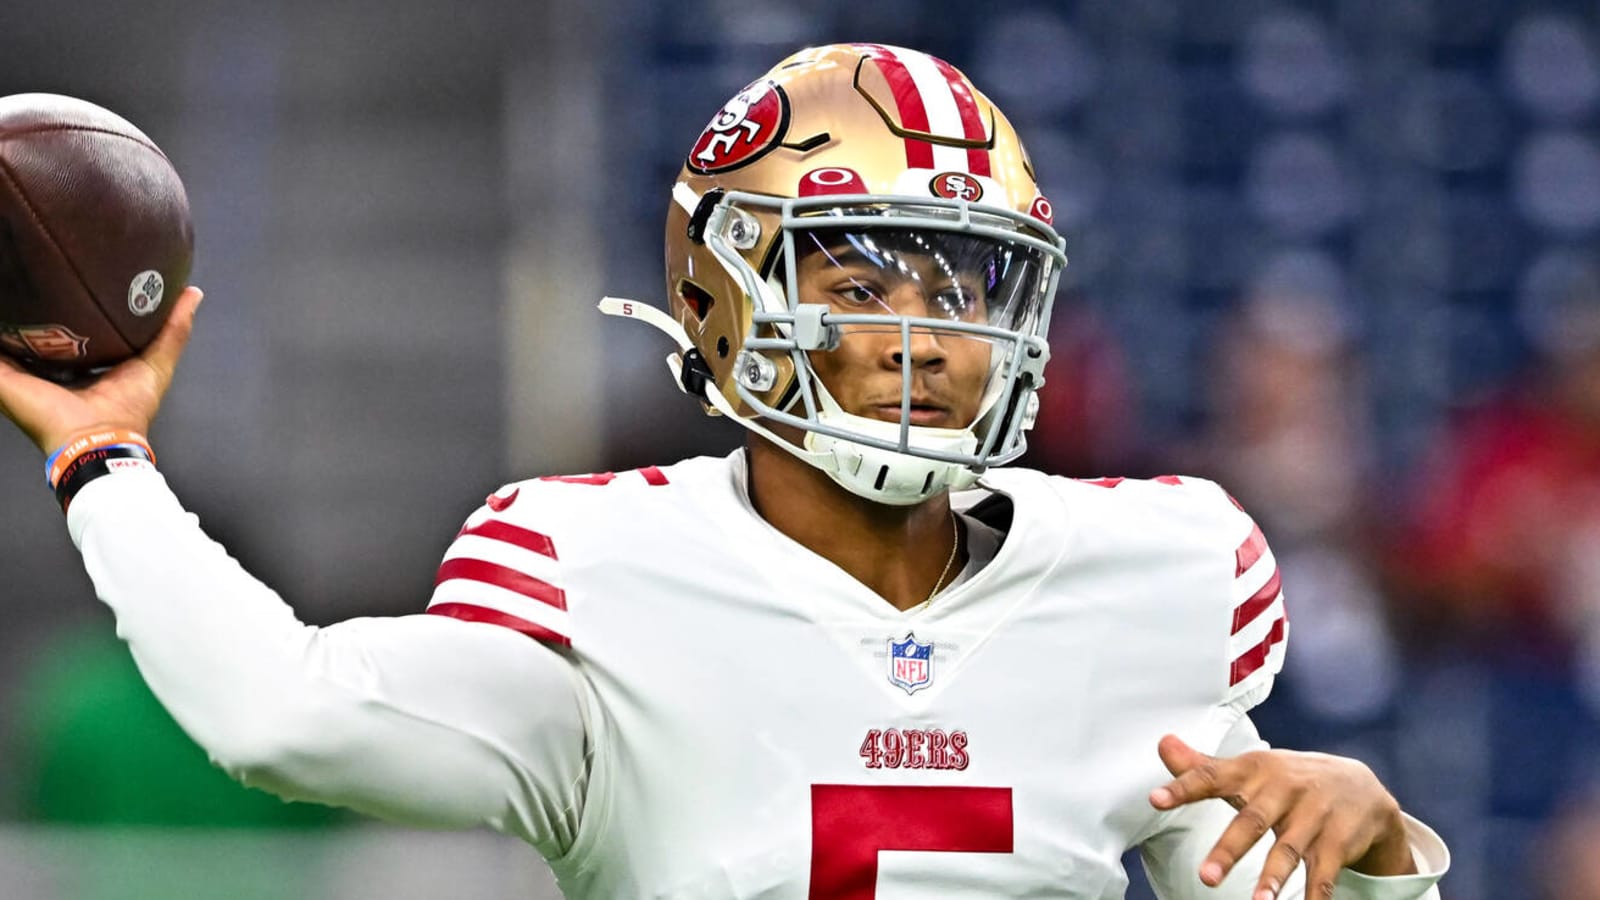 49ers insider: Trade of former first-round QB not 'happening imminently'